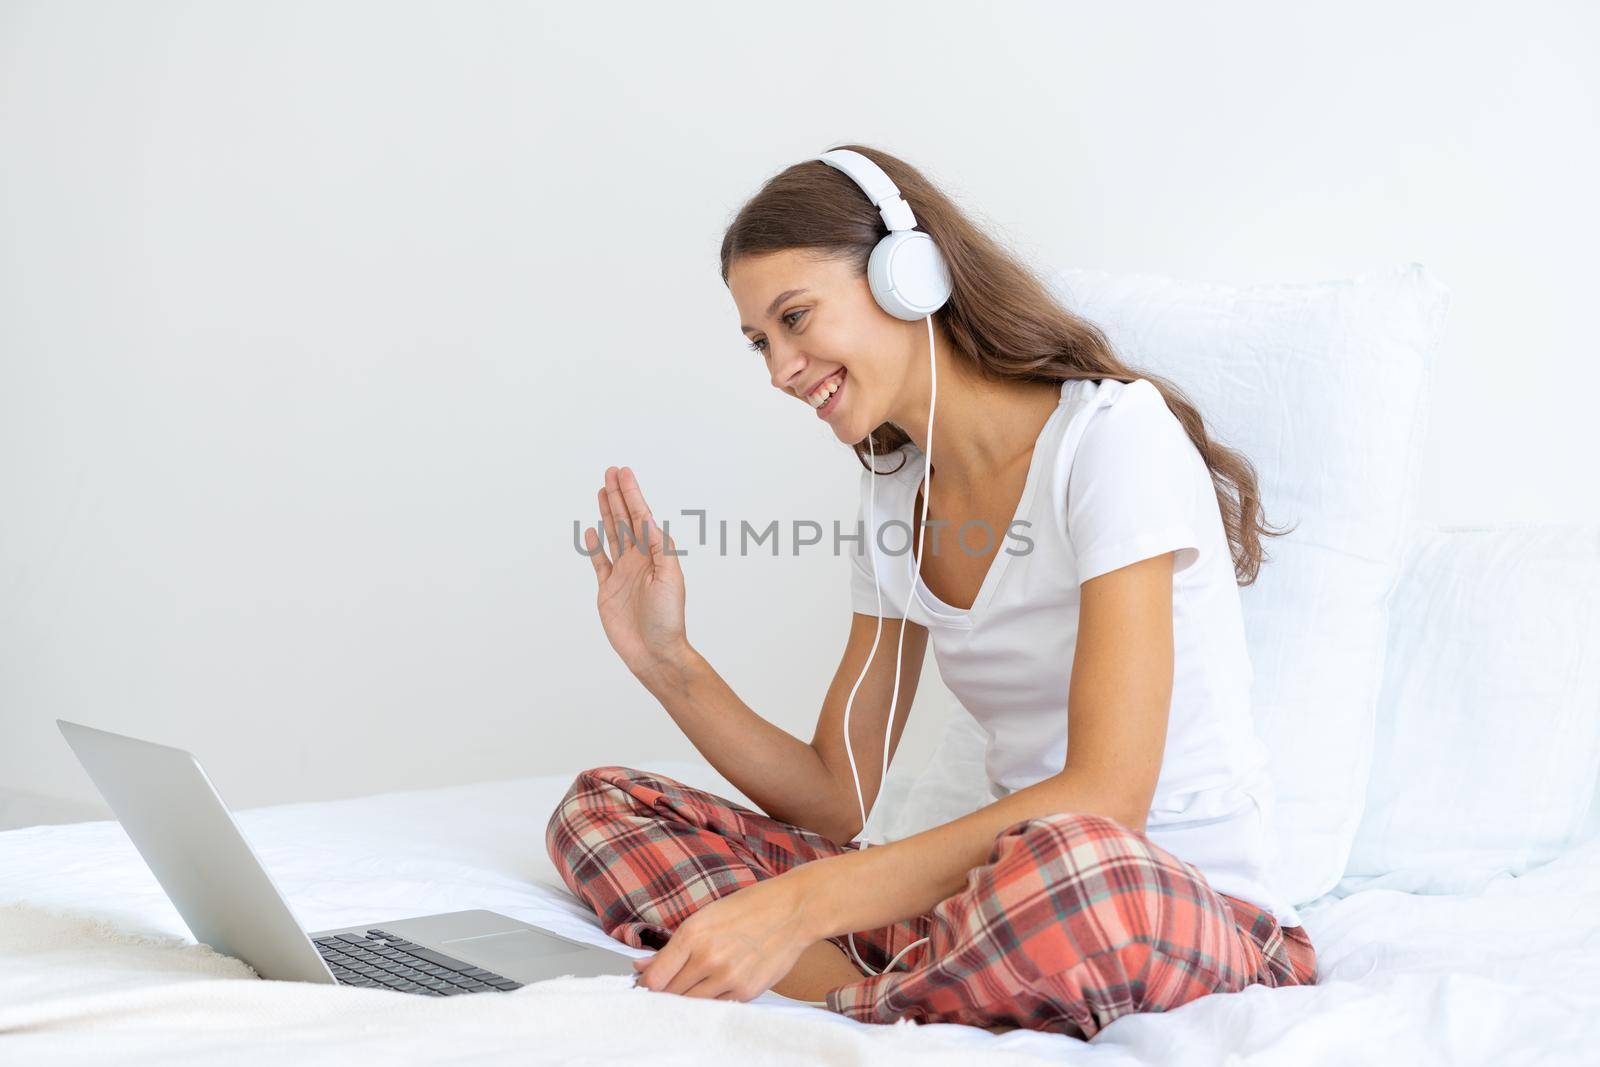 Young girl with headphones talking on conference calls, waving hand, smiling. by NataBene